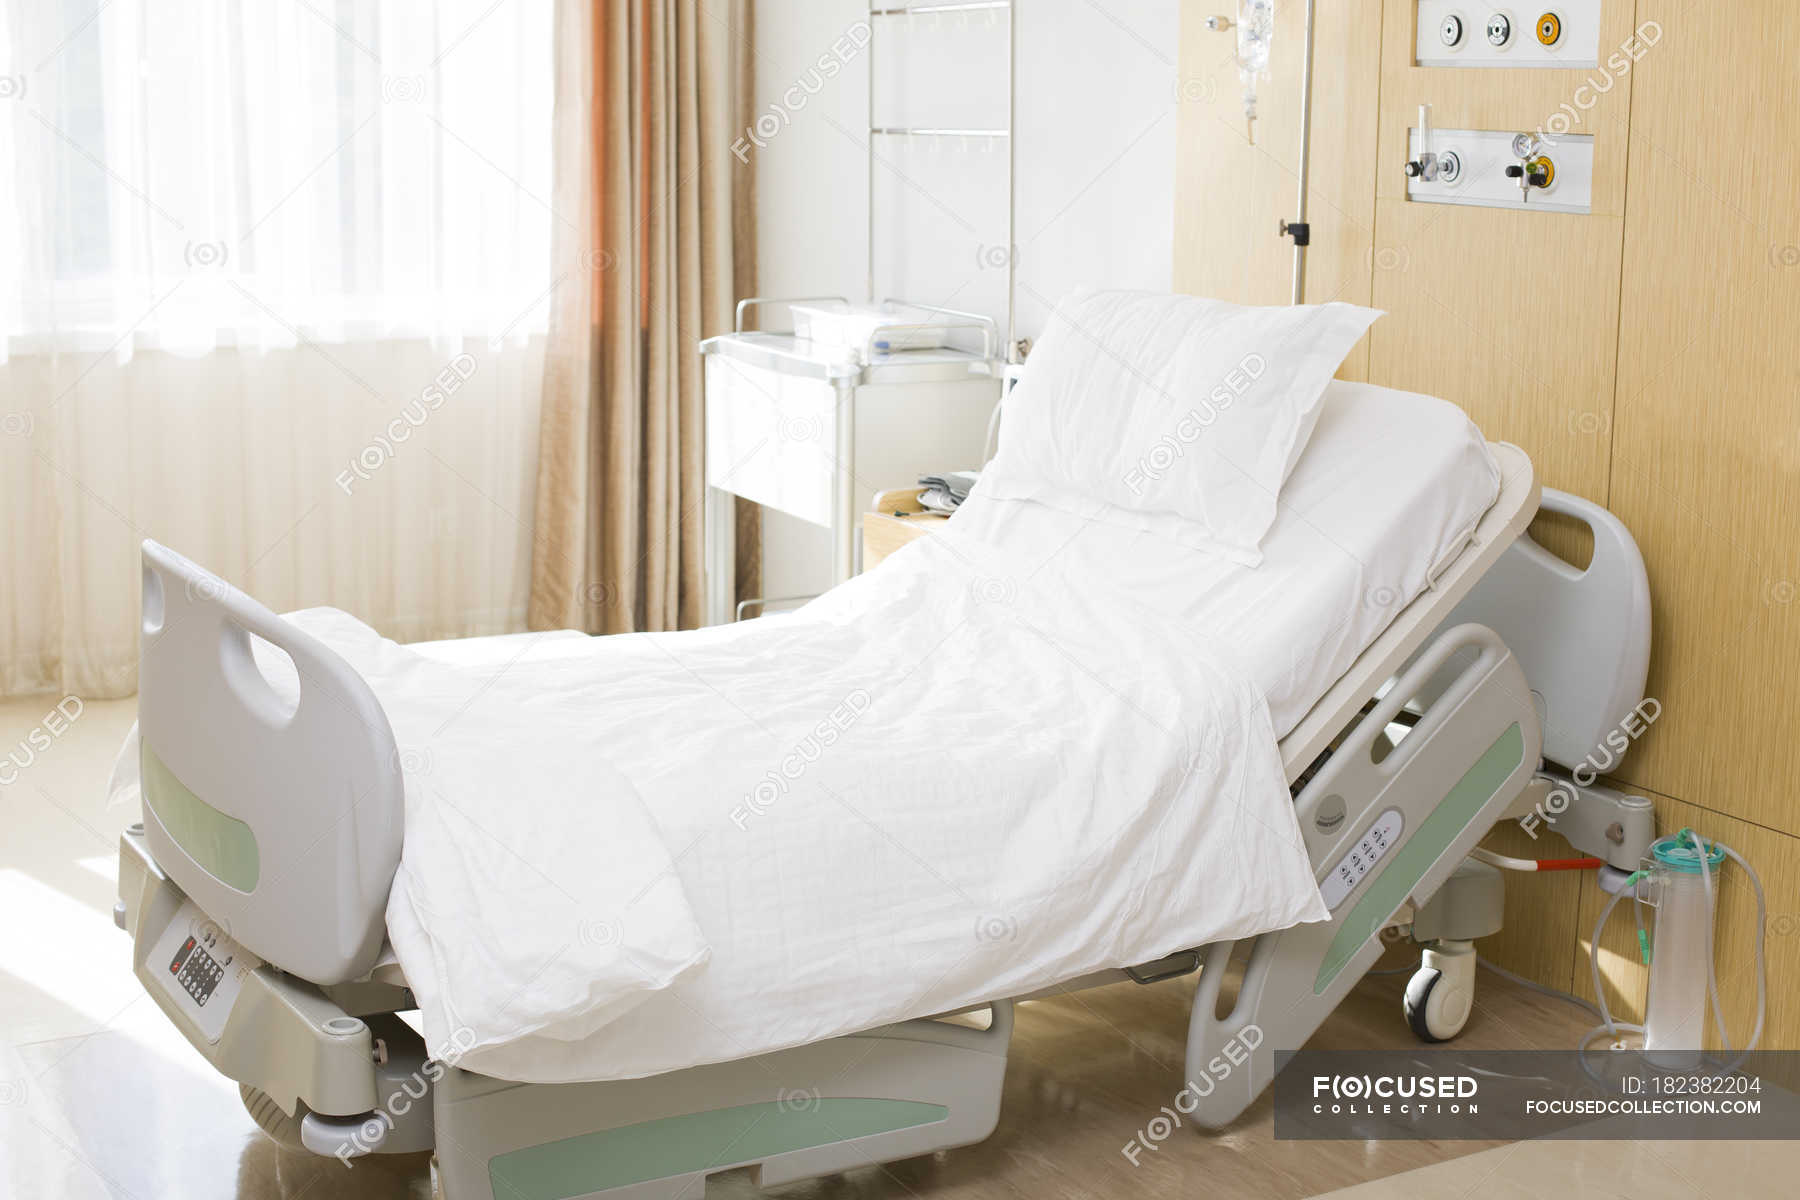 Empty hospital bed in clinic room — leaving, interior - Stock Photo |  #182382204